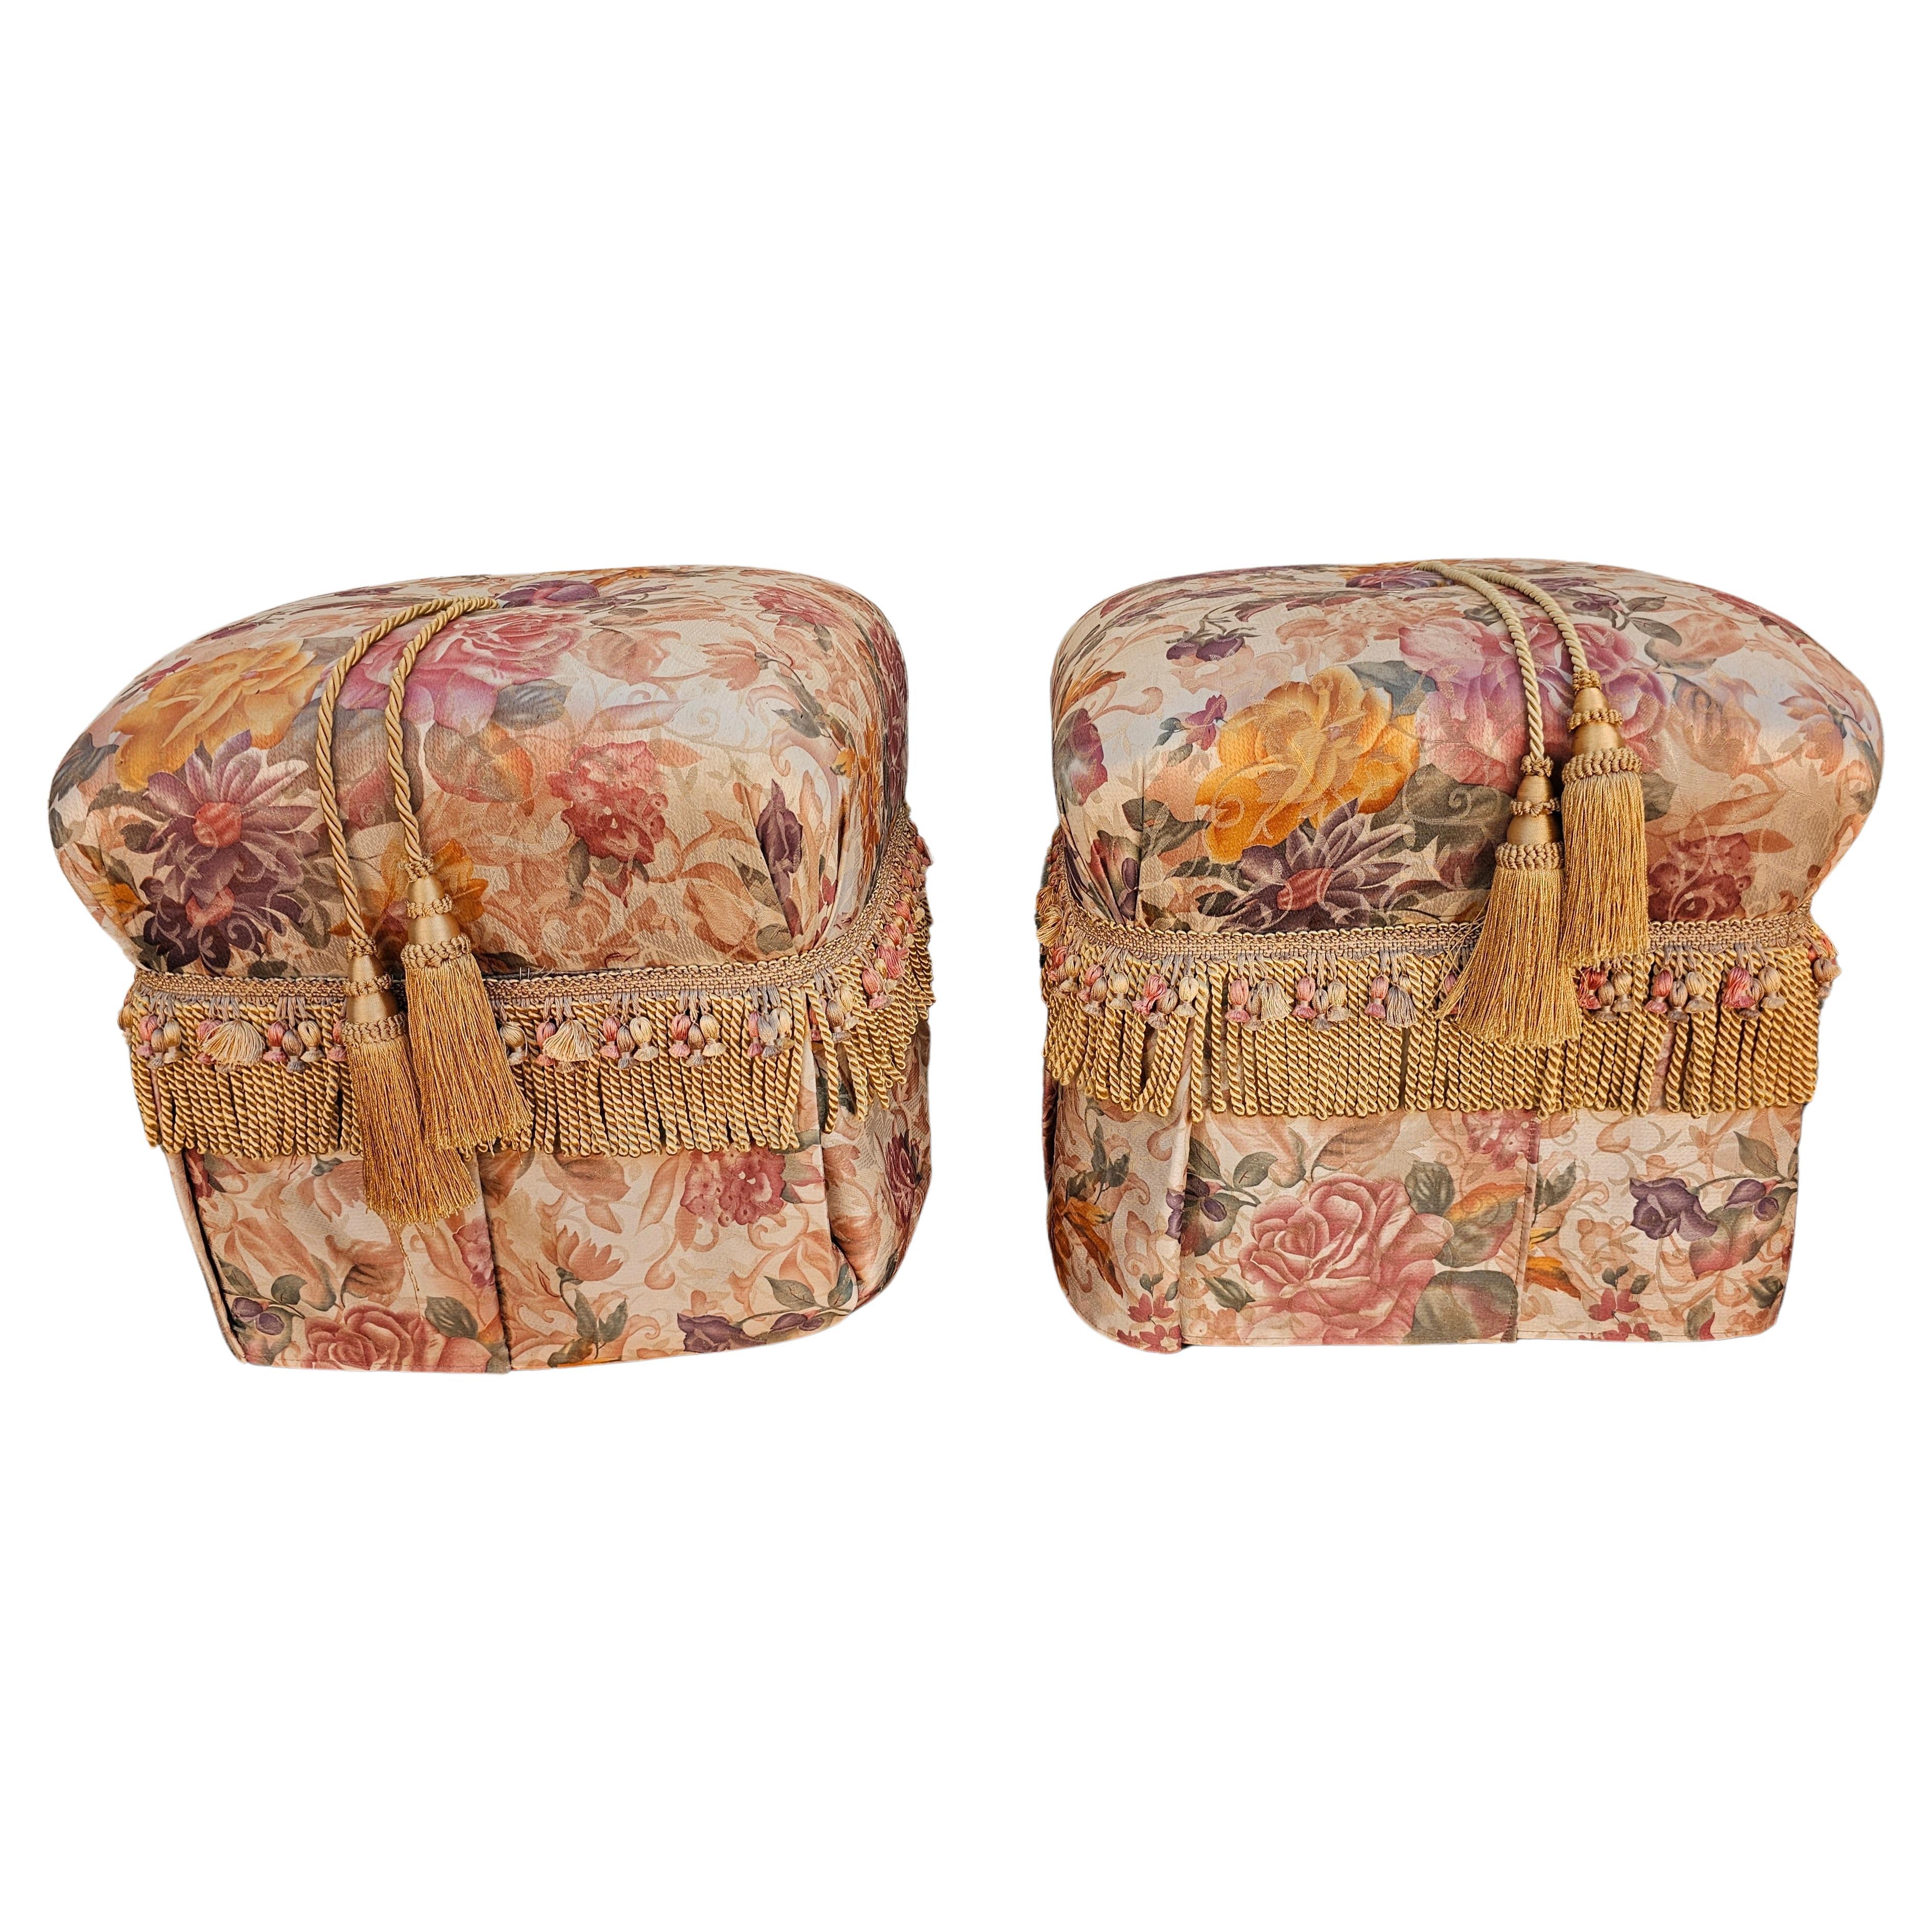 20th Century Modern Upholstered Decorative Footstool Ottomans, Pair For Sale